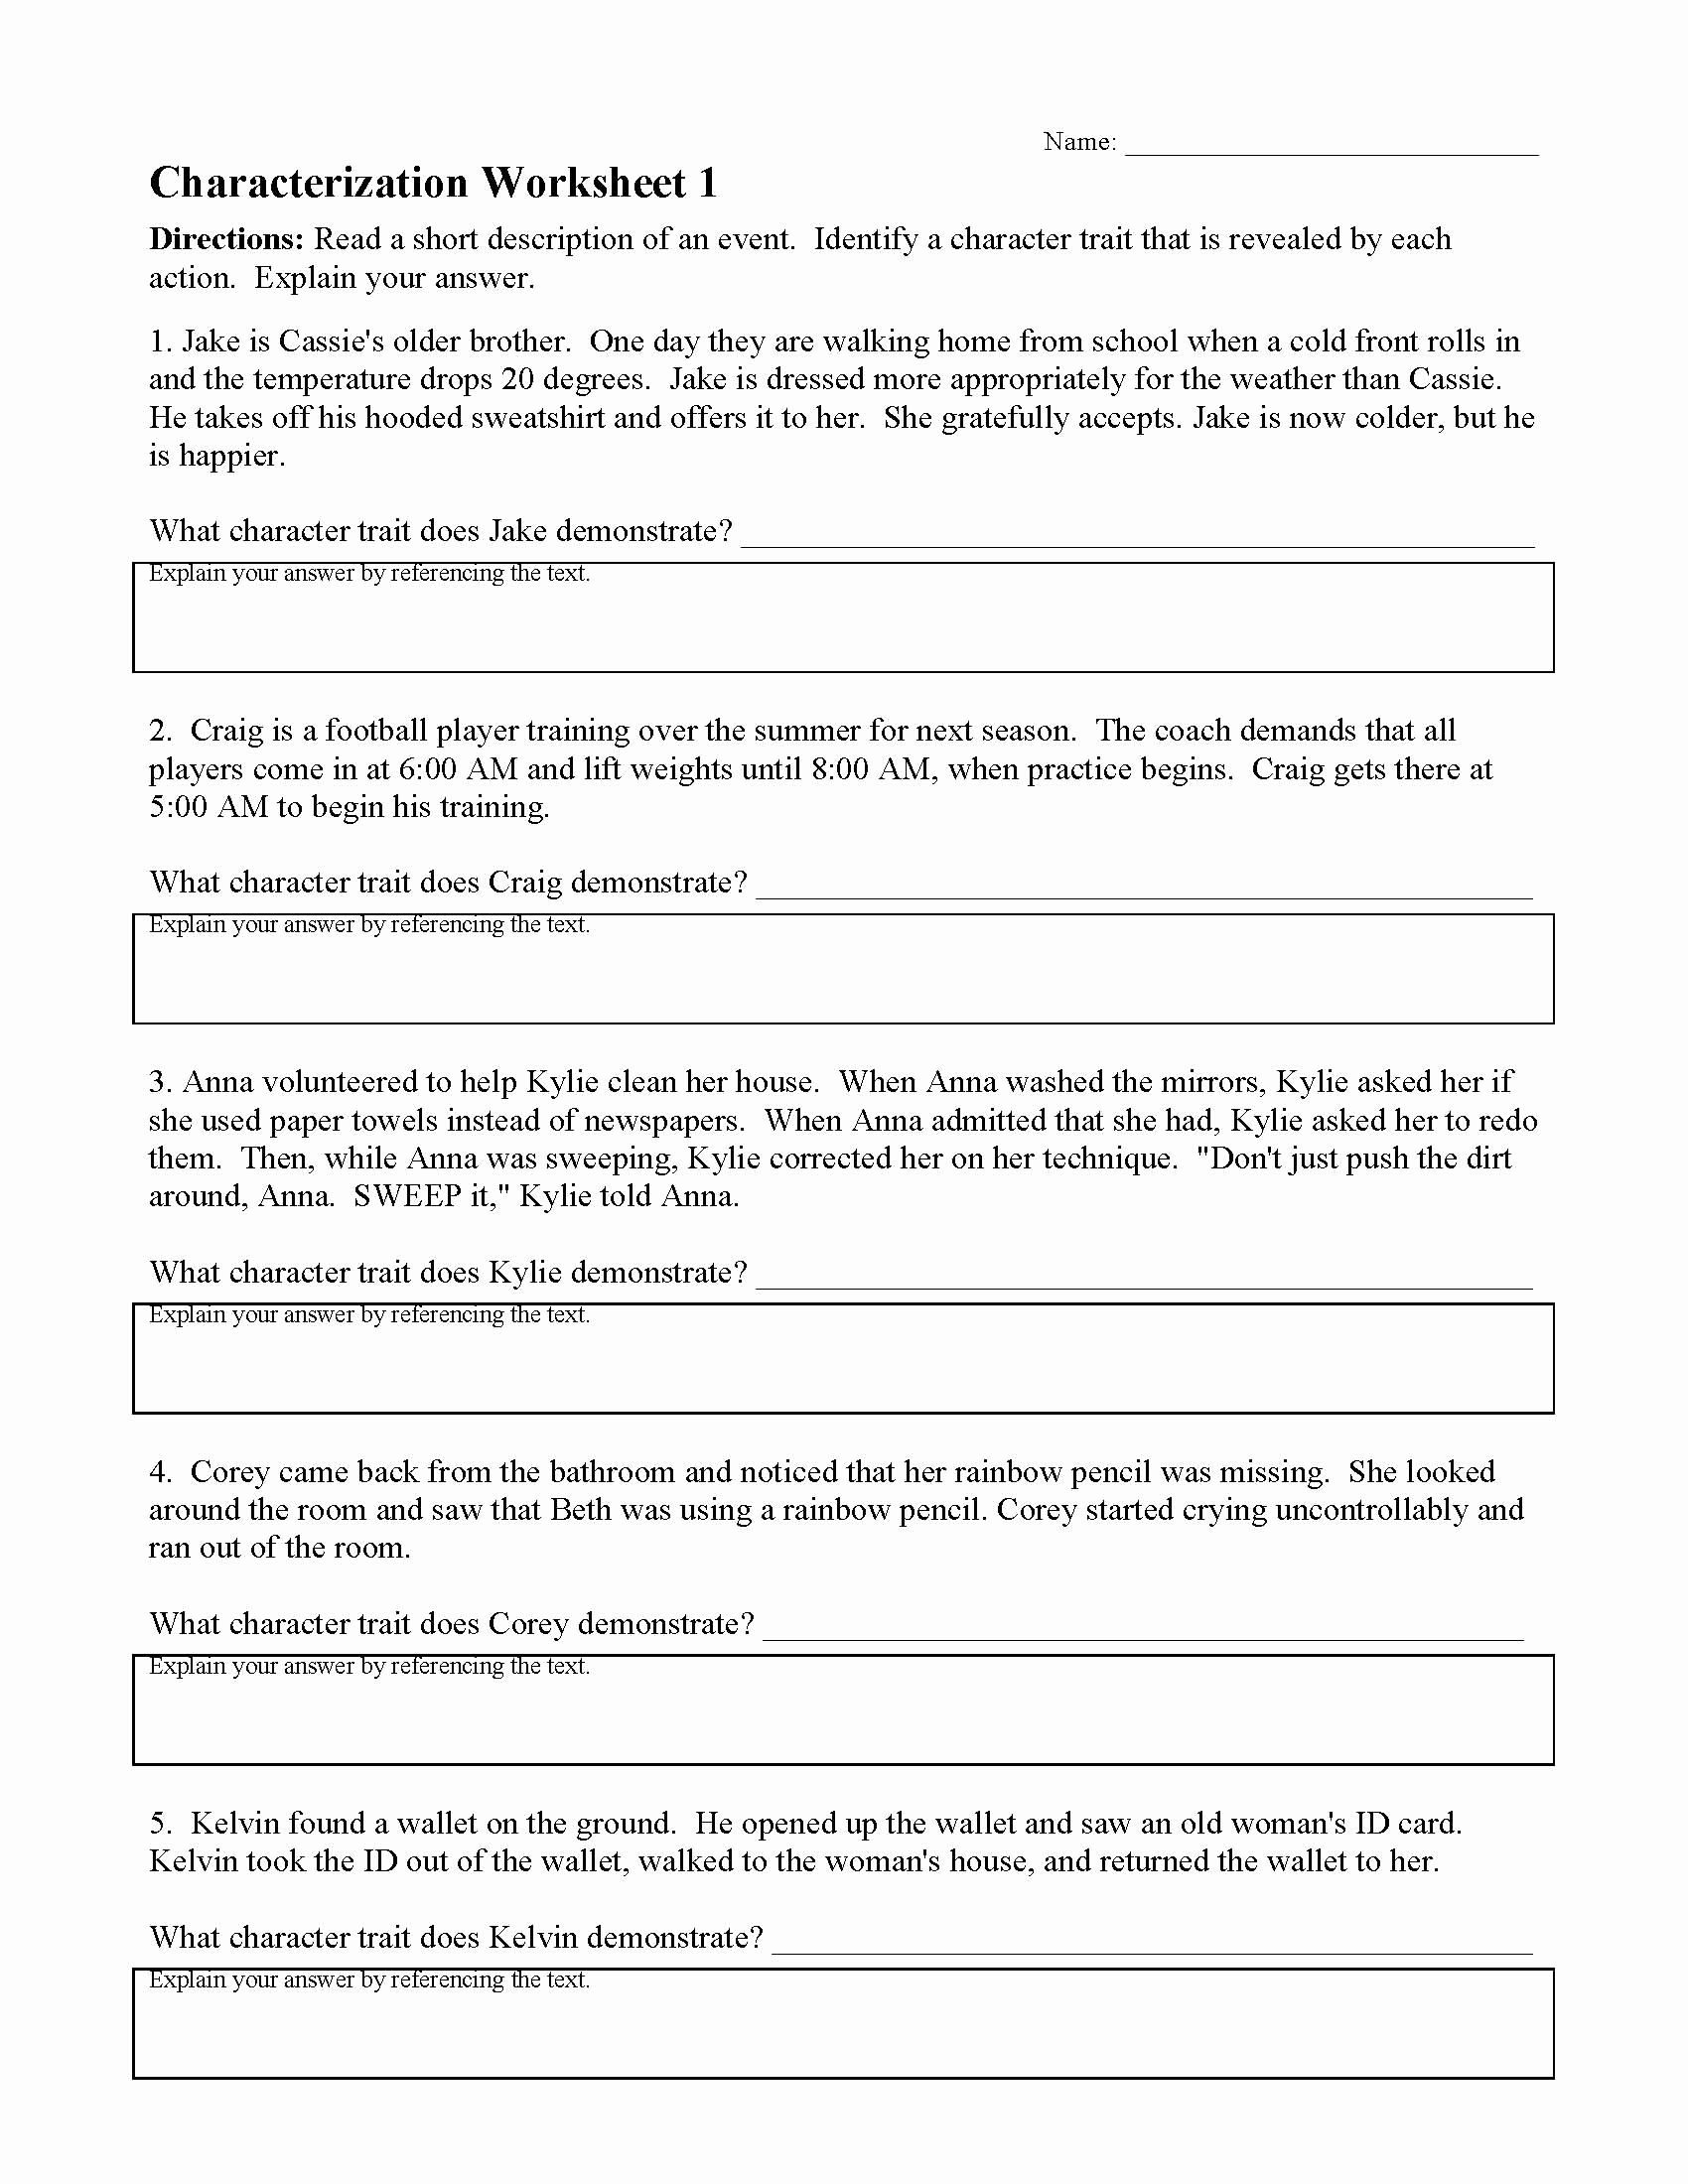 Summary Worksheets Middle School Lovely 20 Summary Worksheets Middle School